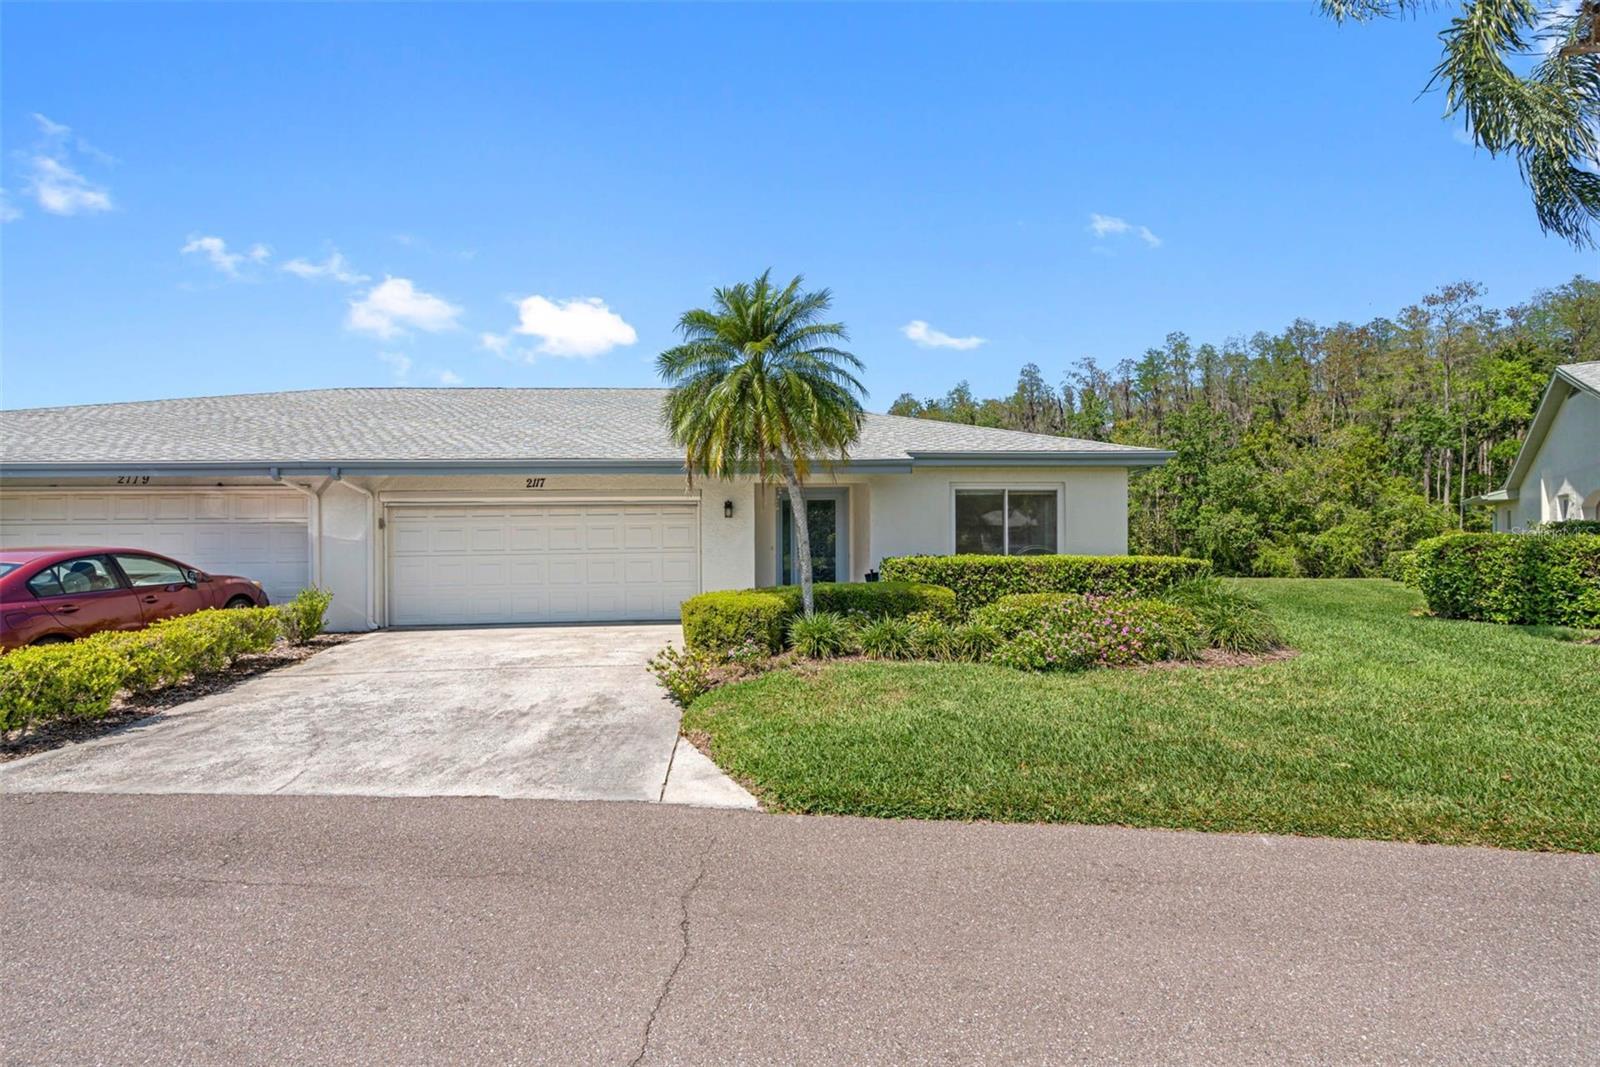 Photo one of 2117 Hereford Dr # 436 Sun City Center FL 33573 | MLS T3514207